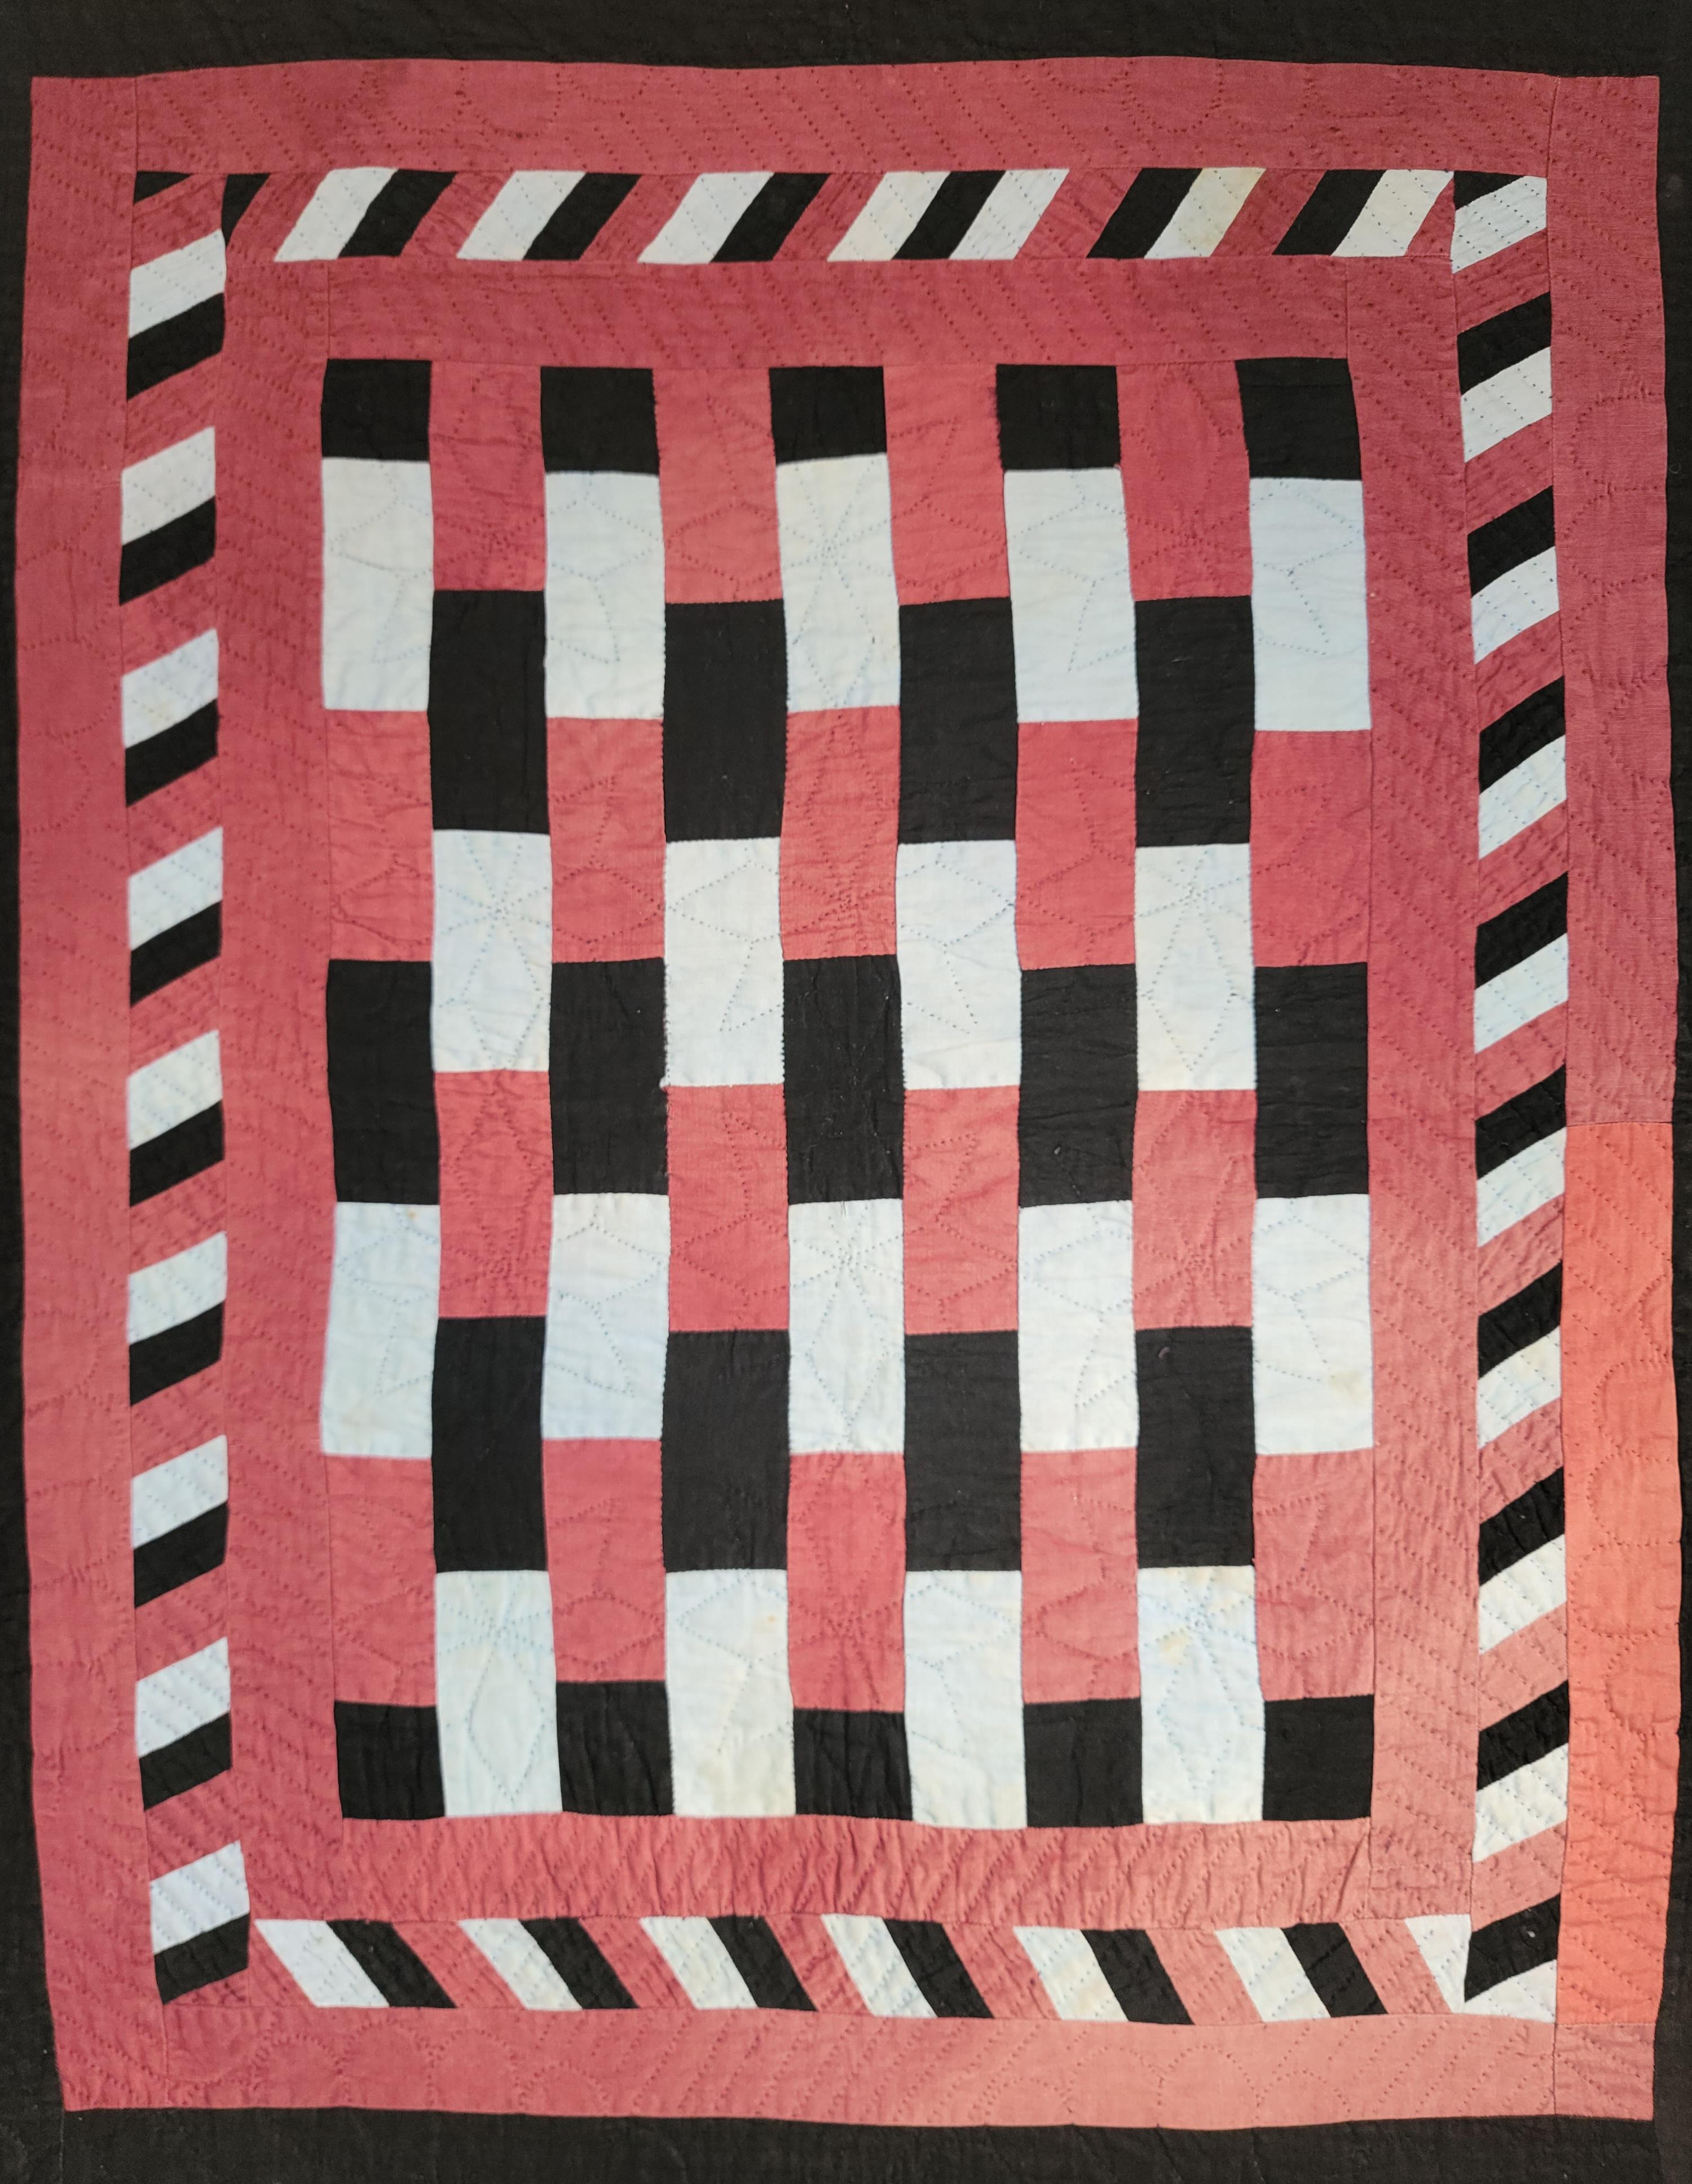 Early 20t century Holmes County, Ohio Amish crib quilt. Ready for hanging horizontal or diagonally.The condition is very good with minor fade in the lower bottom of the quilt.